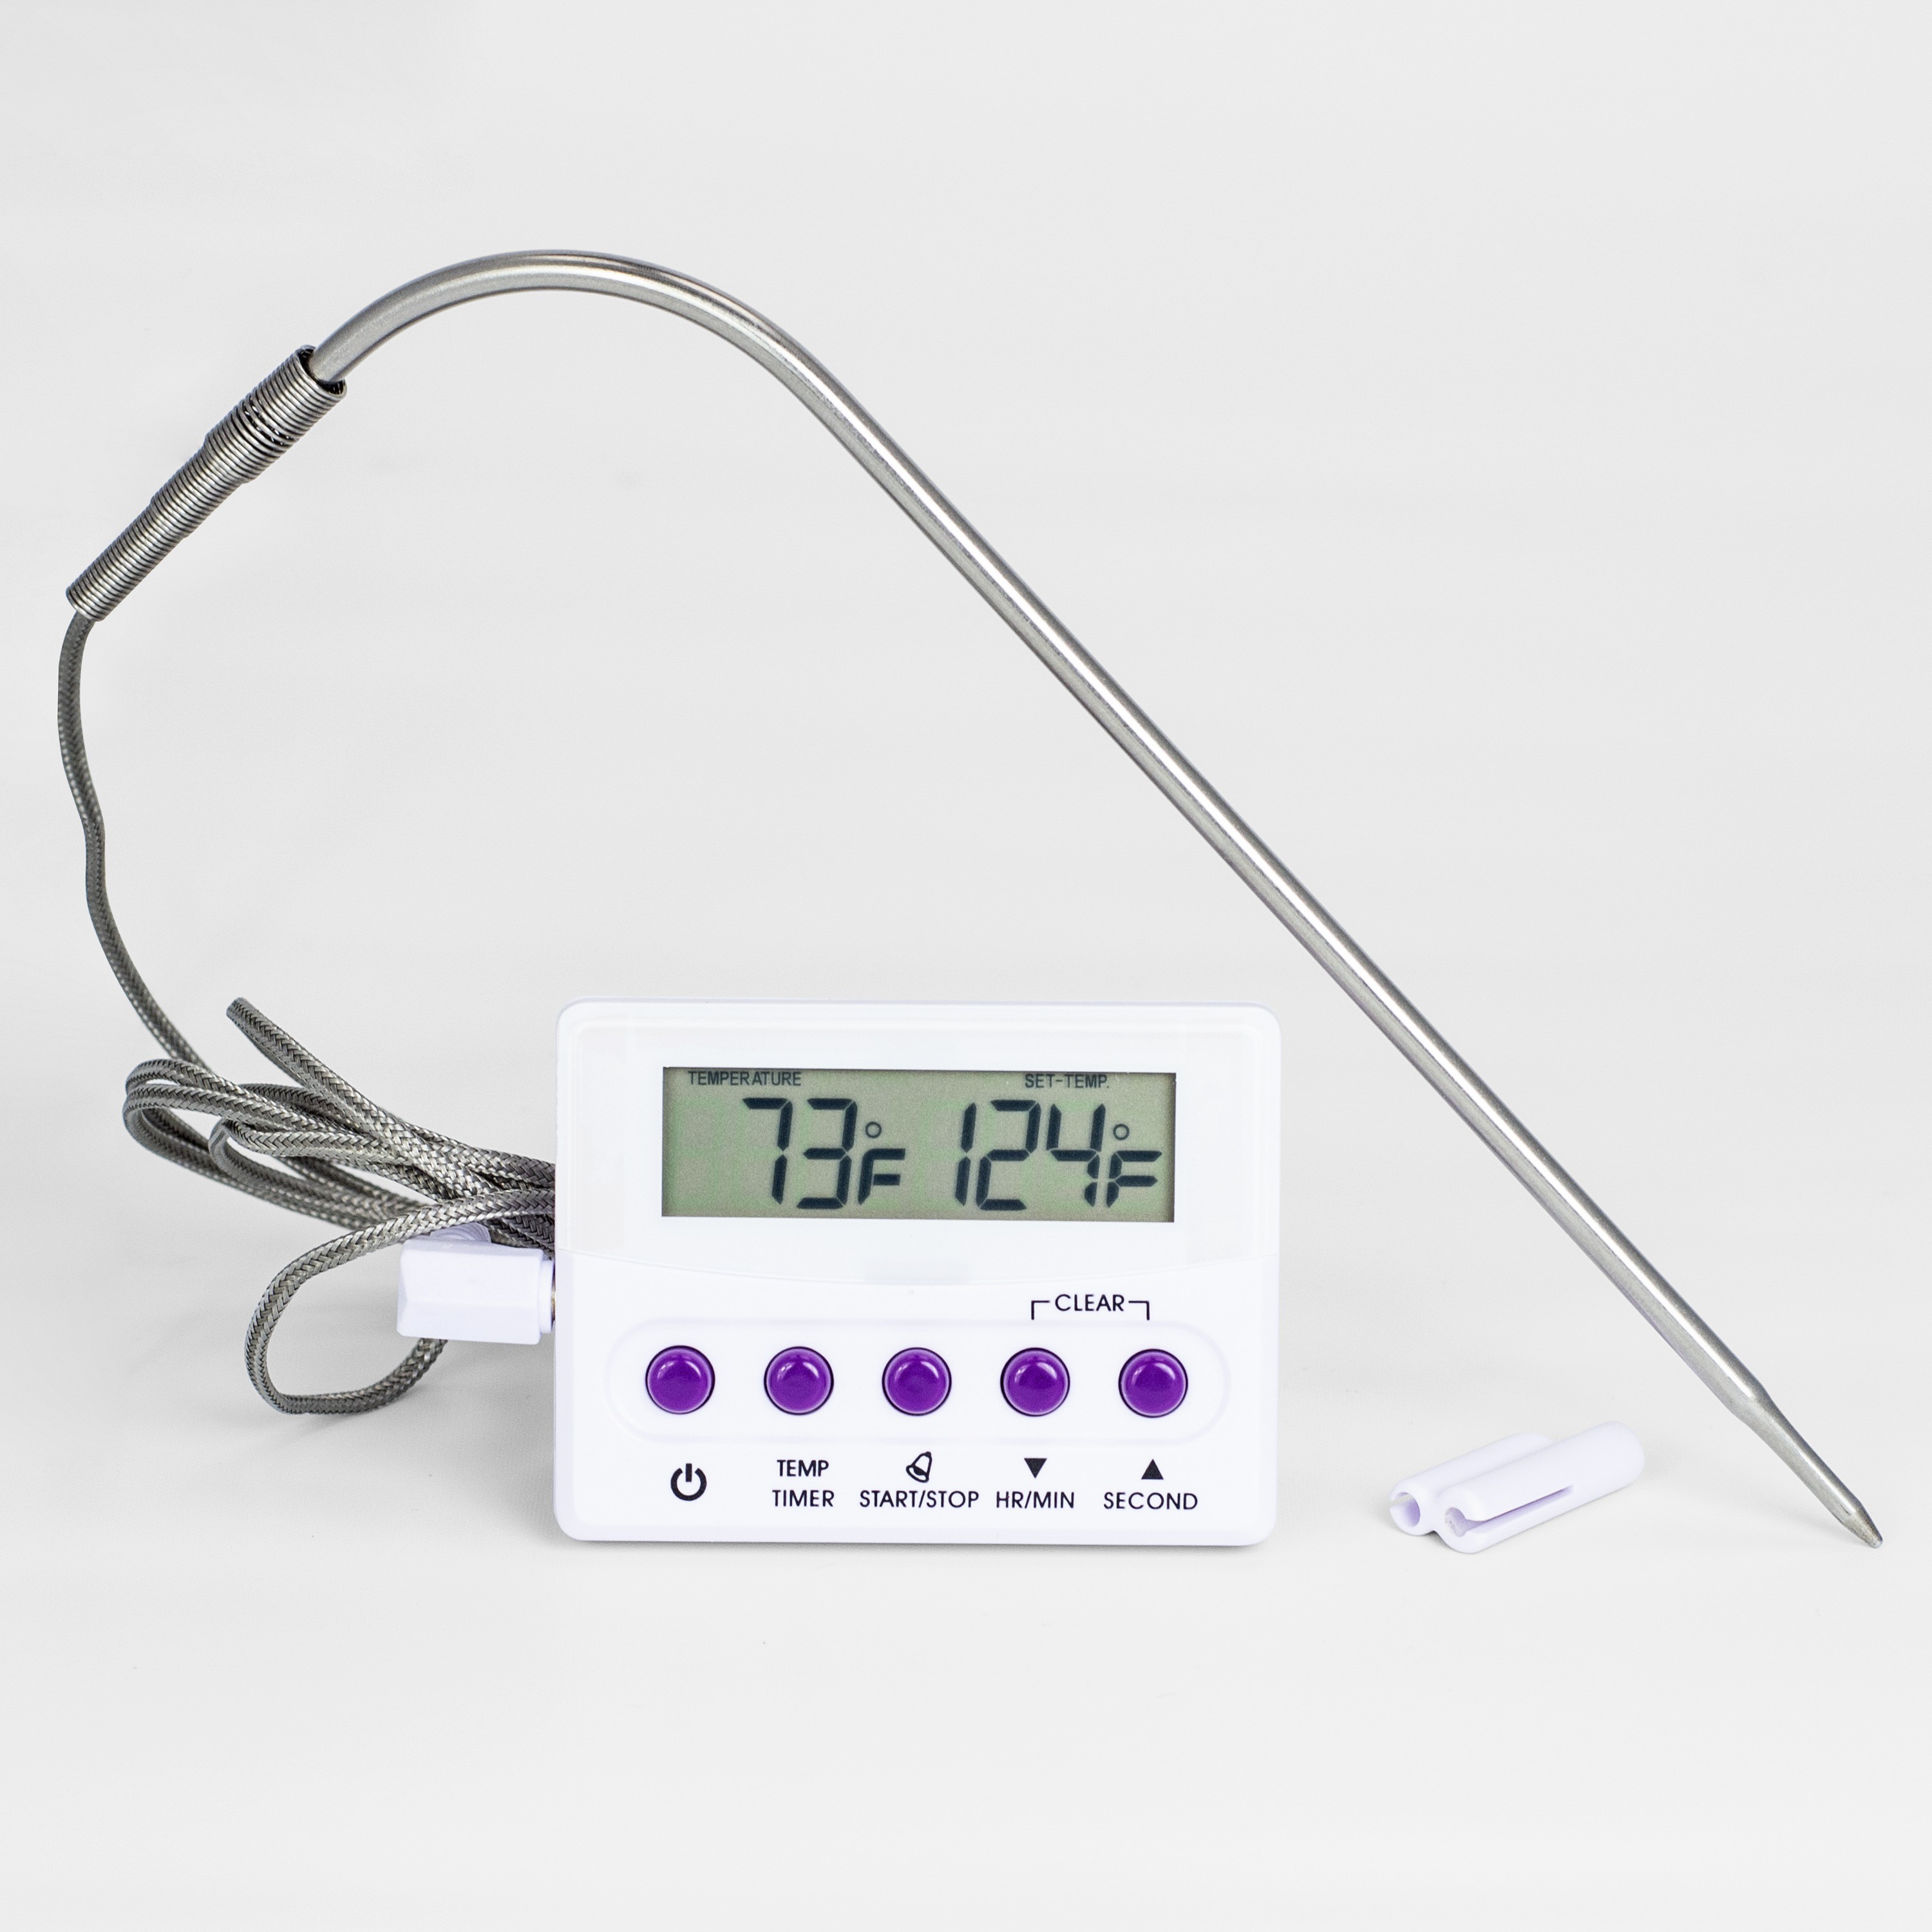 EA1 0/100C DURAC Red BELART Thermometer 